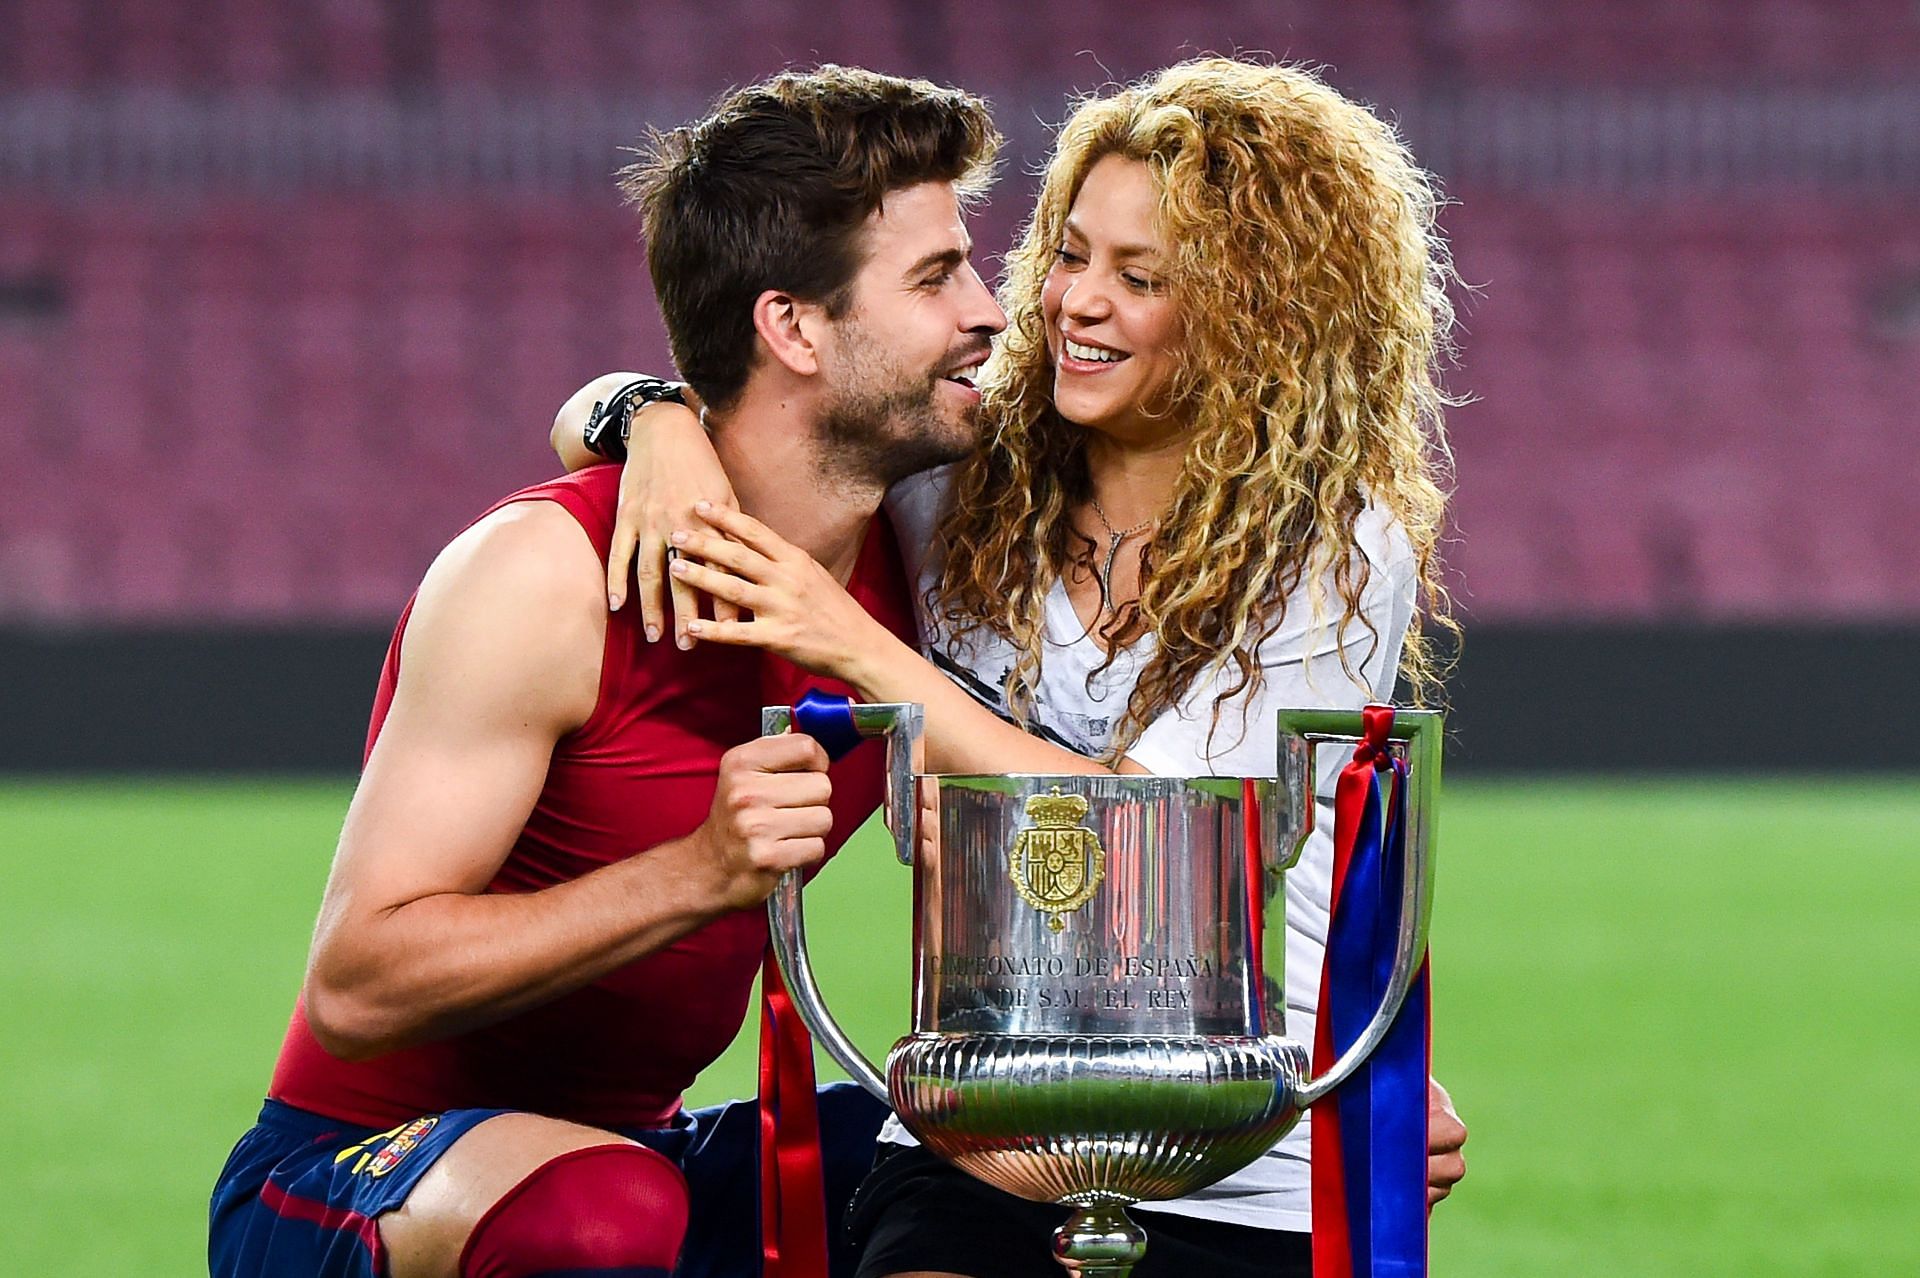 The Barca has been spotted with an unknown blonde